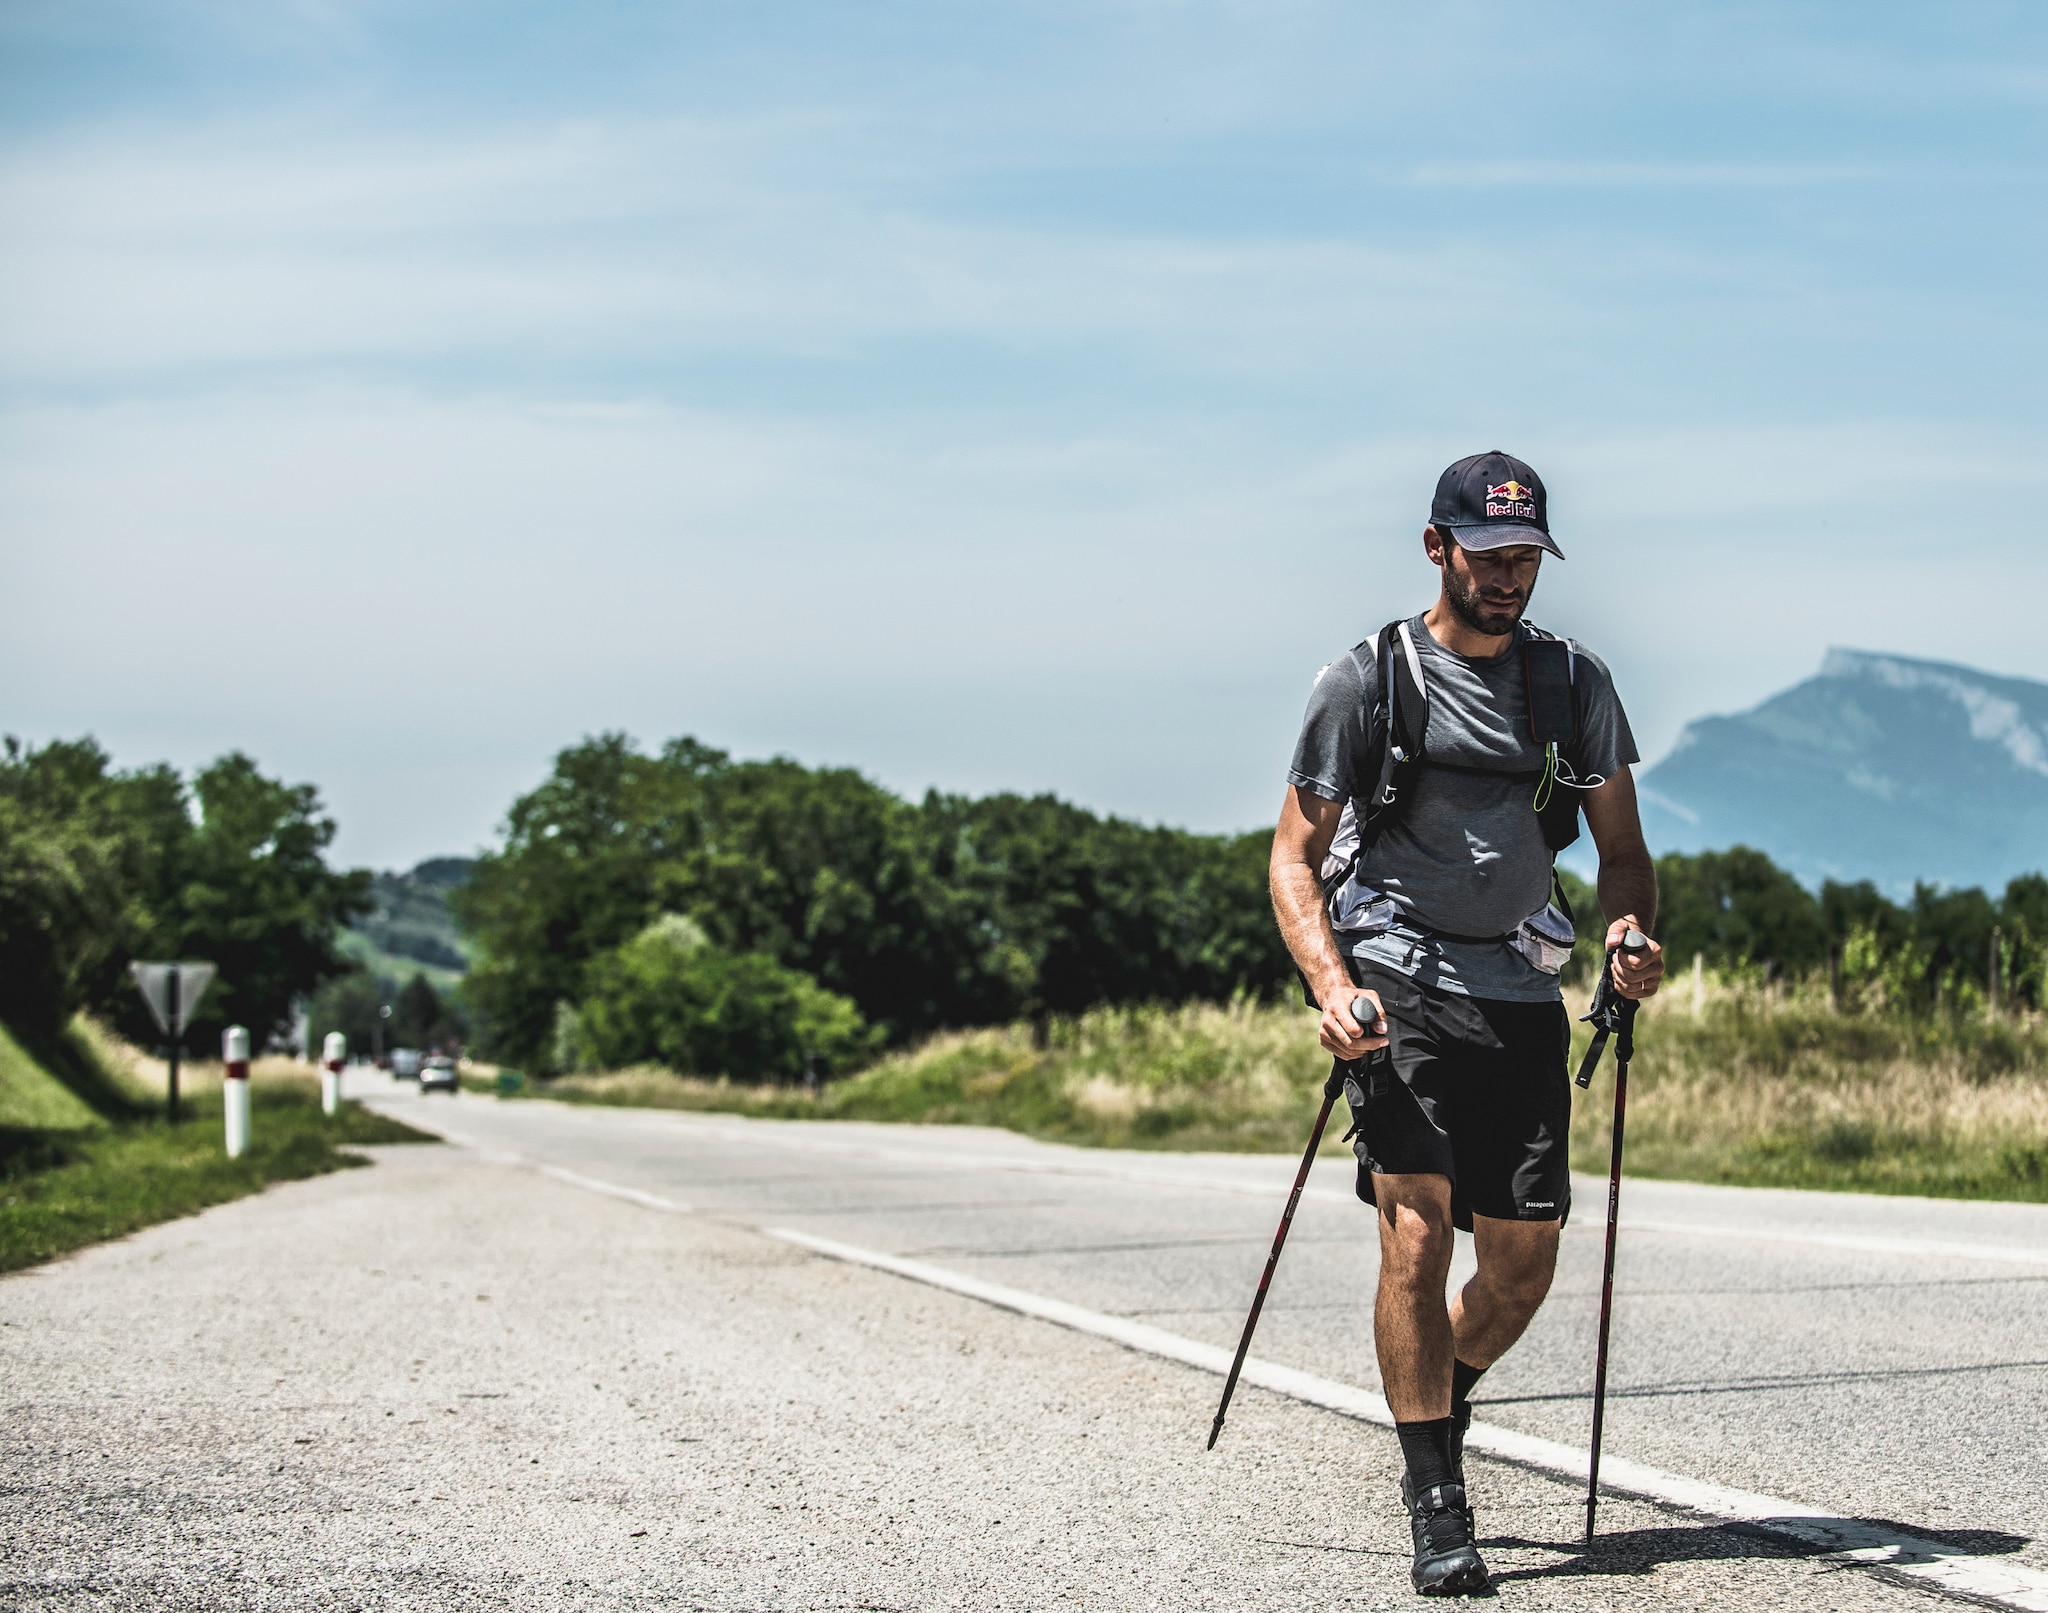 Tom De Dorlodot (BEL) walkes through the villages of Barraux, France at the Red Bull X-Alps on June 24, 2019